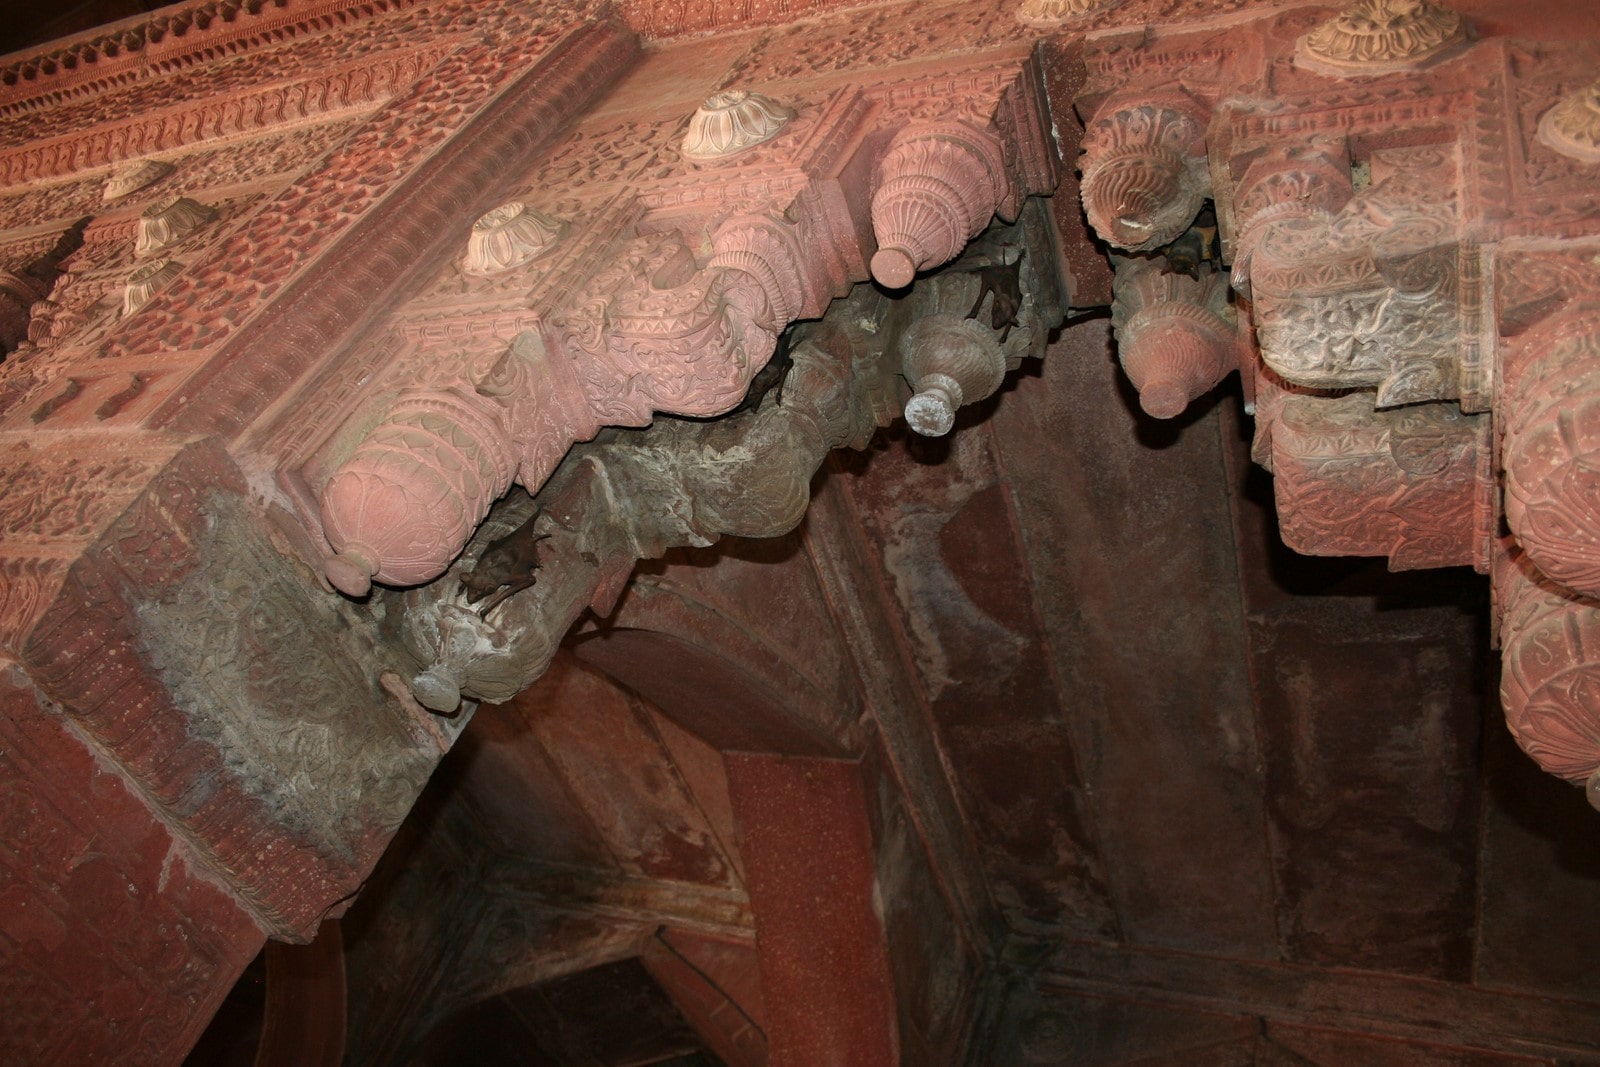 Bats at Agra Fort